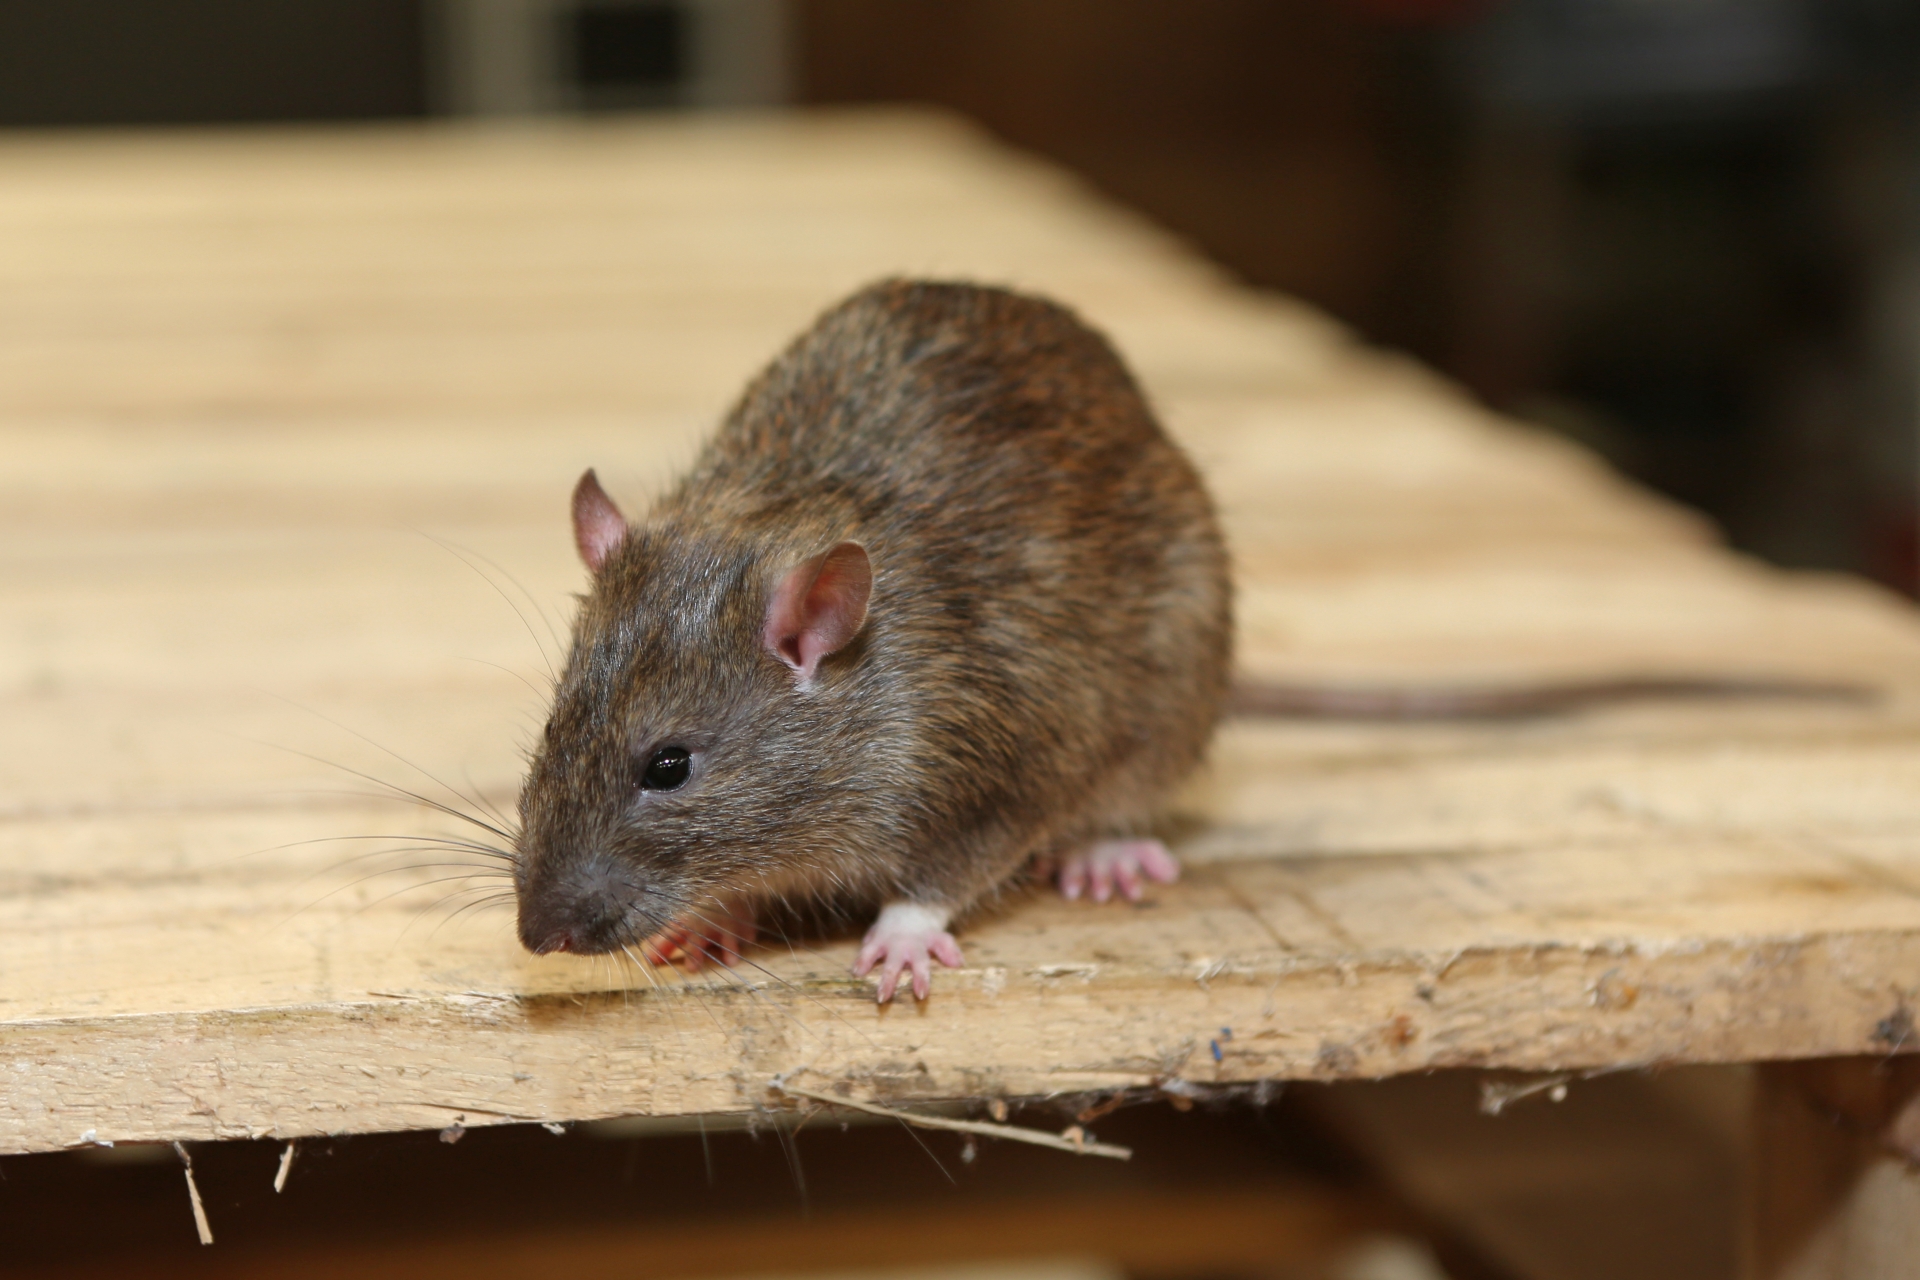 Rat extermination, Pest Control in Southall, UB1, UB2. Call Now 020 8166 9746